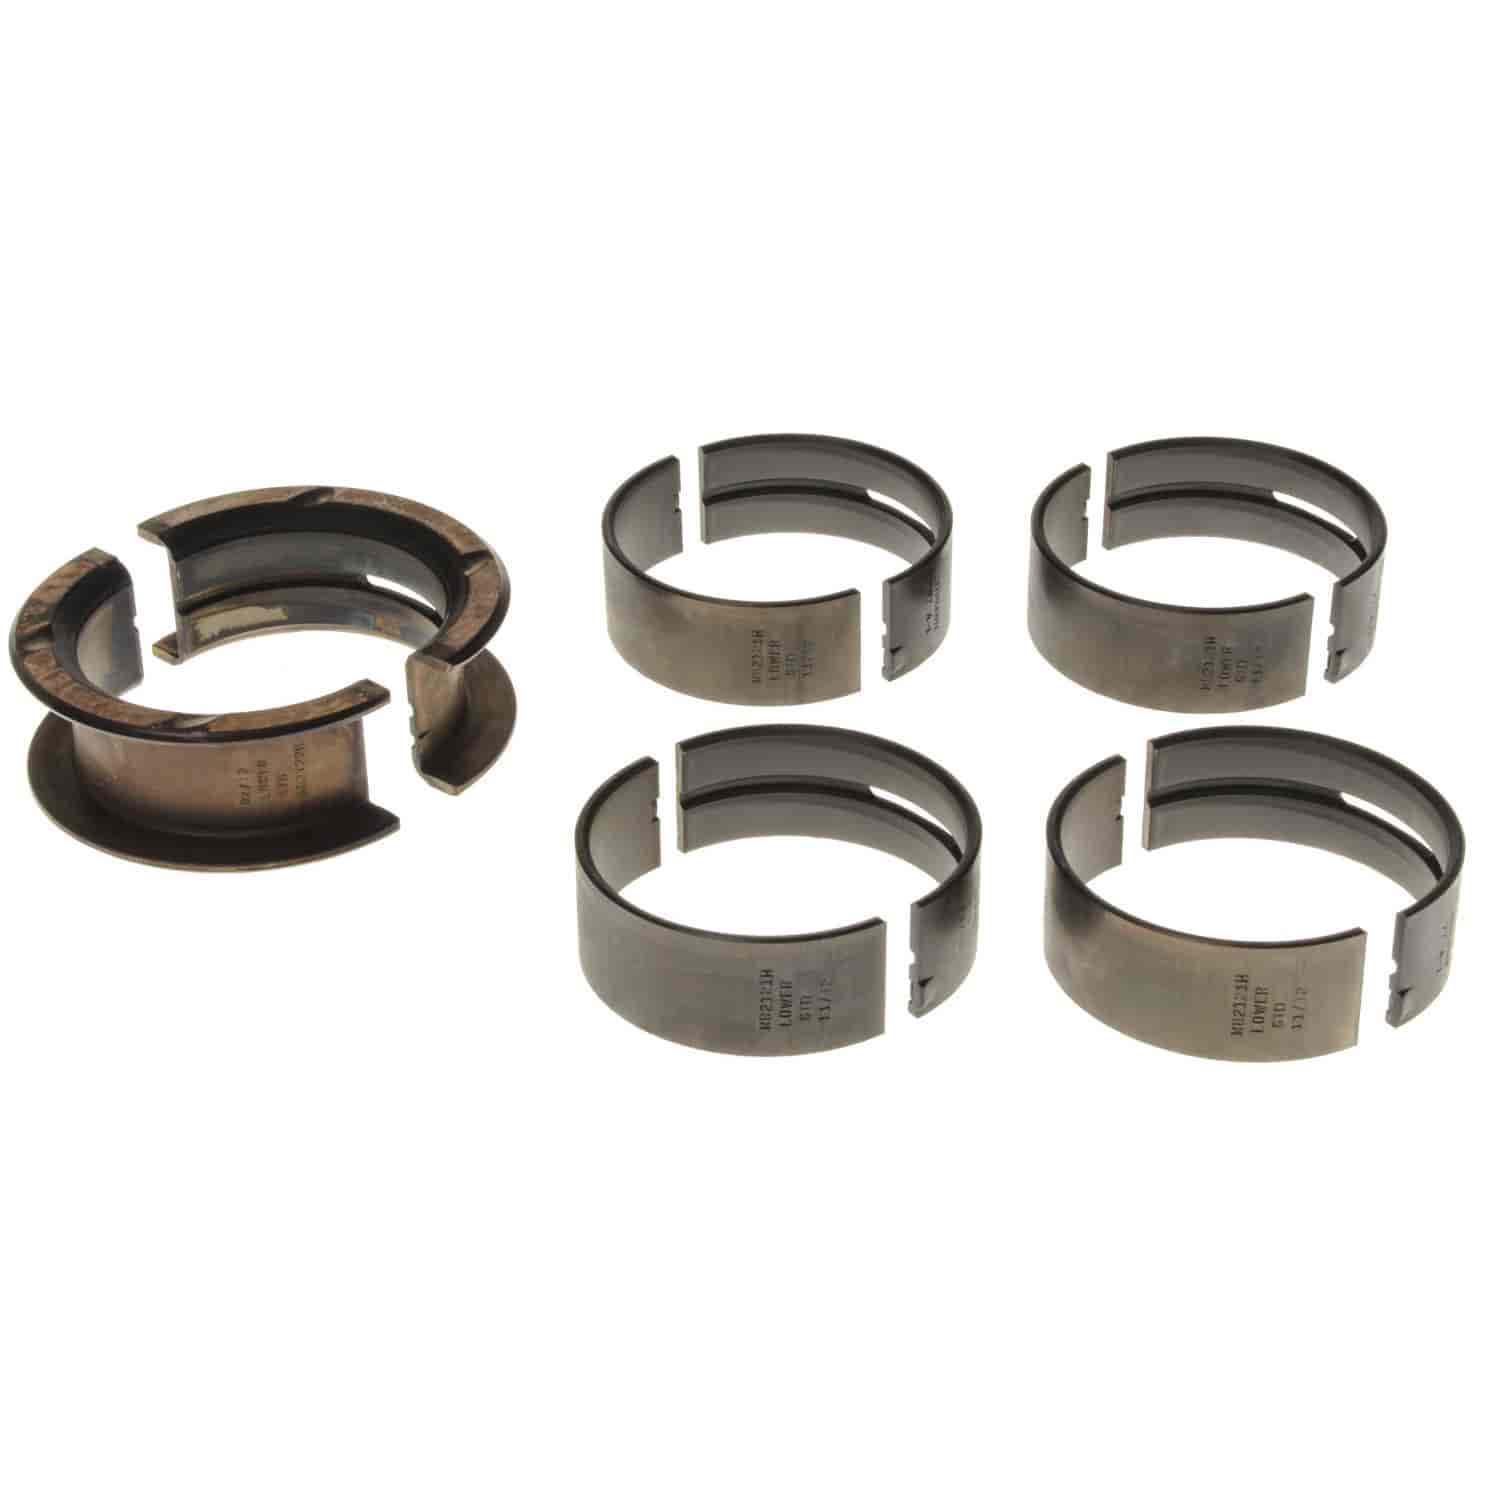 Main Bearing Set Ford 1962-2001 V8 221/255/260/289/302 (3.6/4.2/4.3/4.7/5.0L) with Standard Size